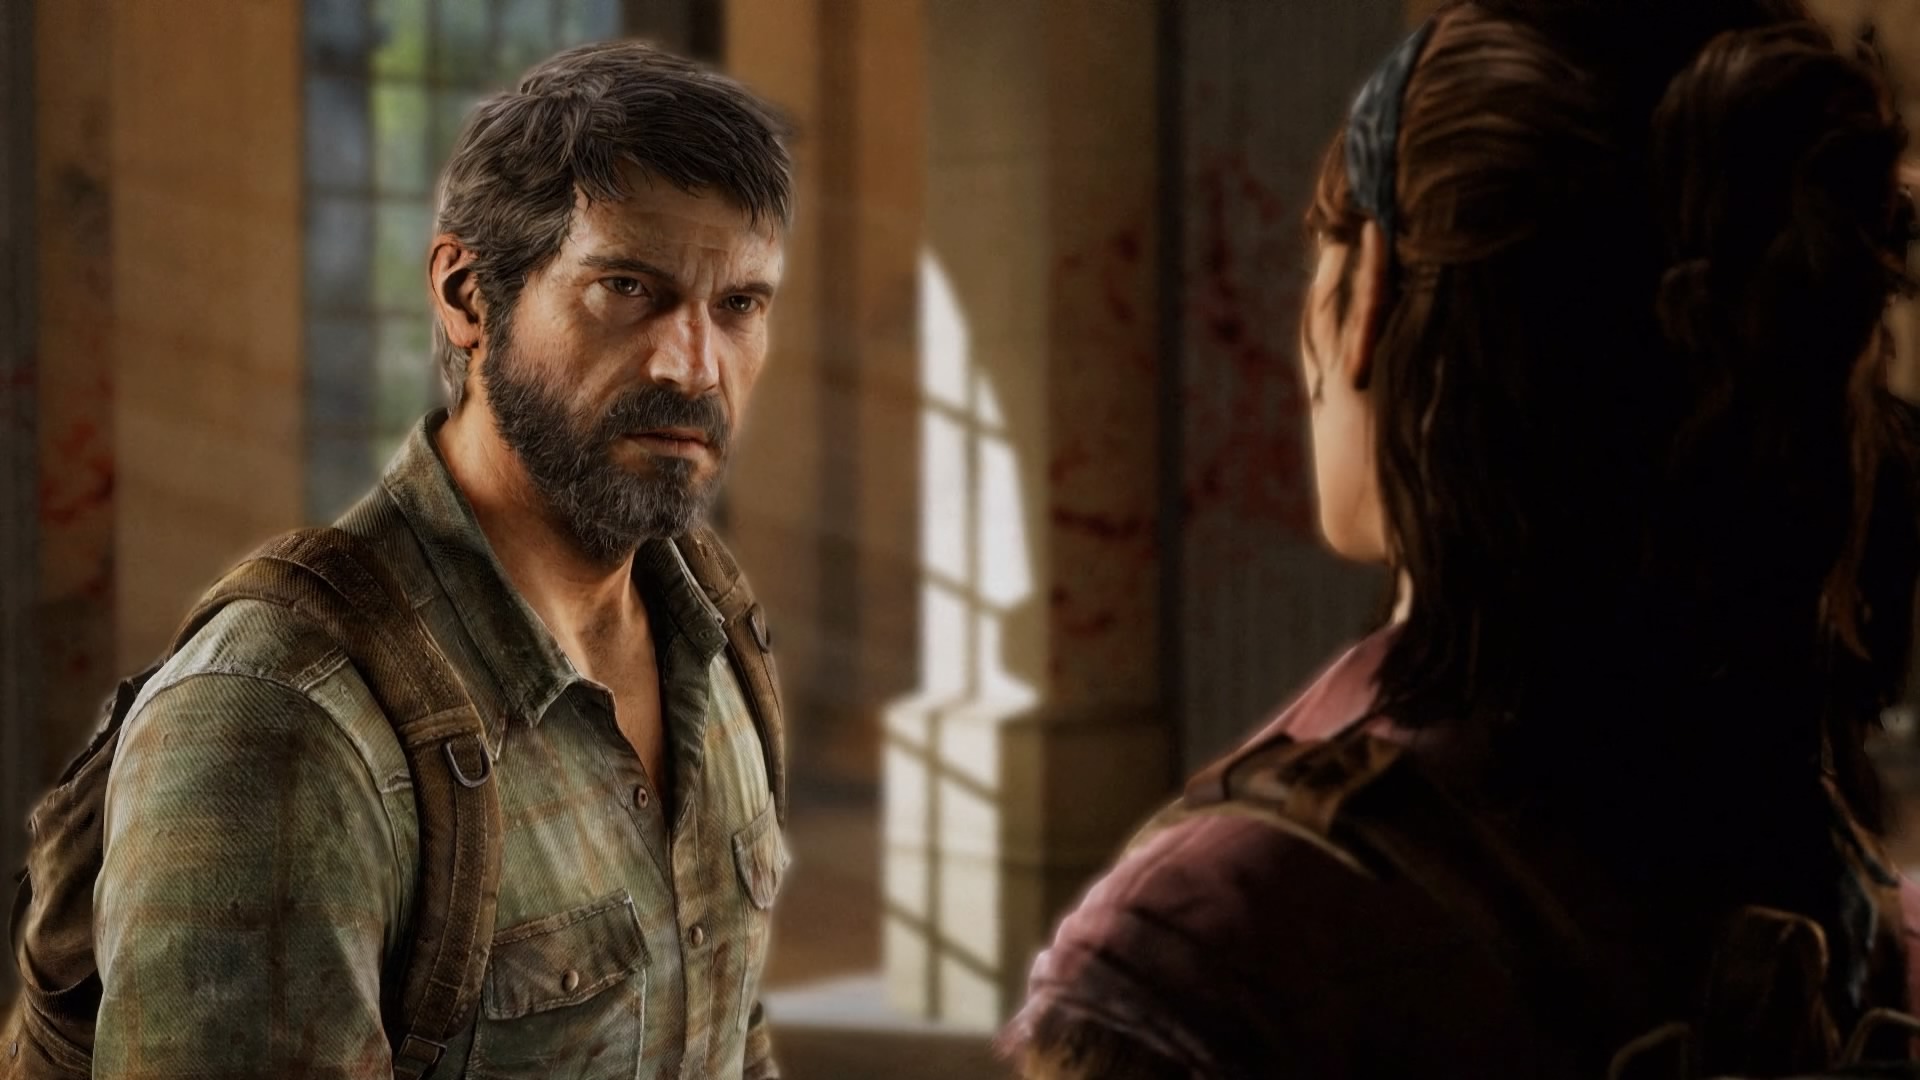 The Last Of Us: Episode 2 Recap - A Tess Of Friendship